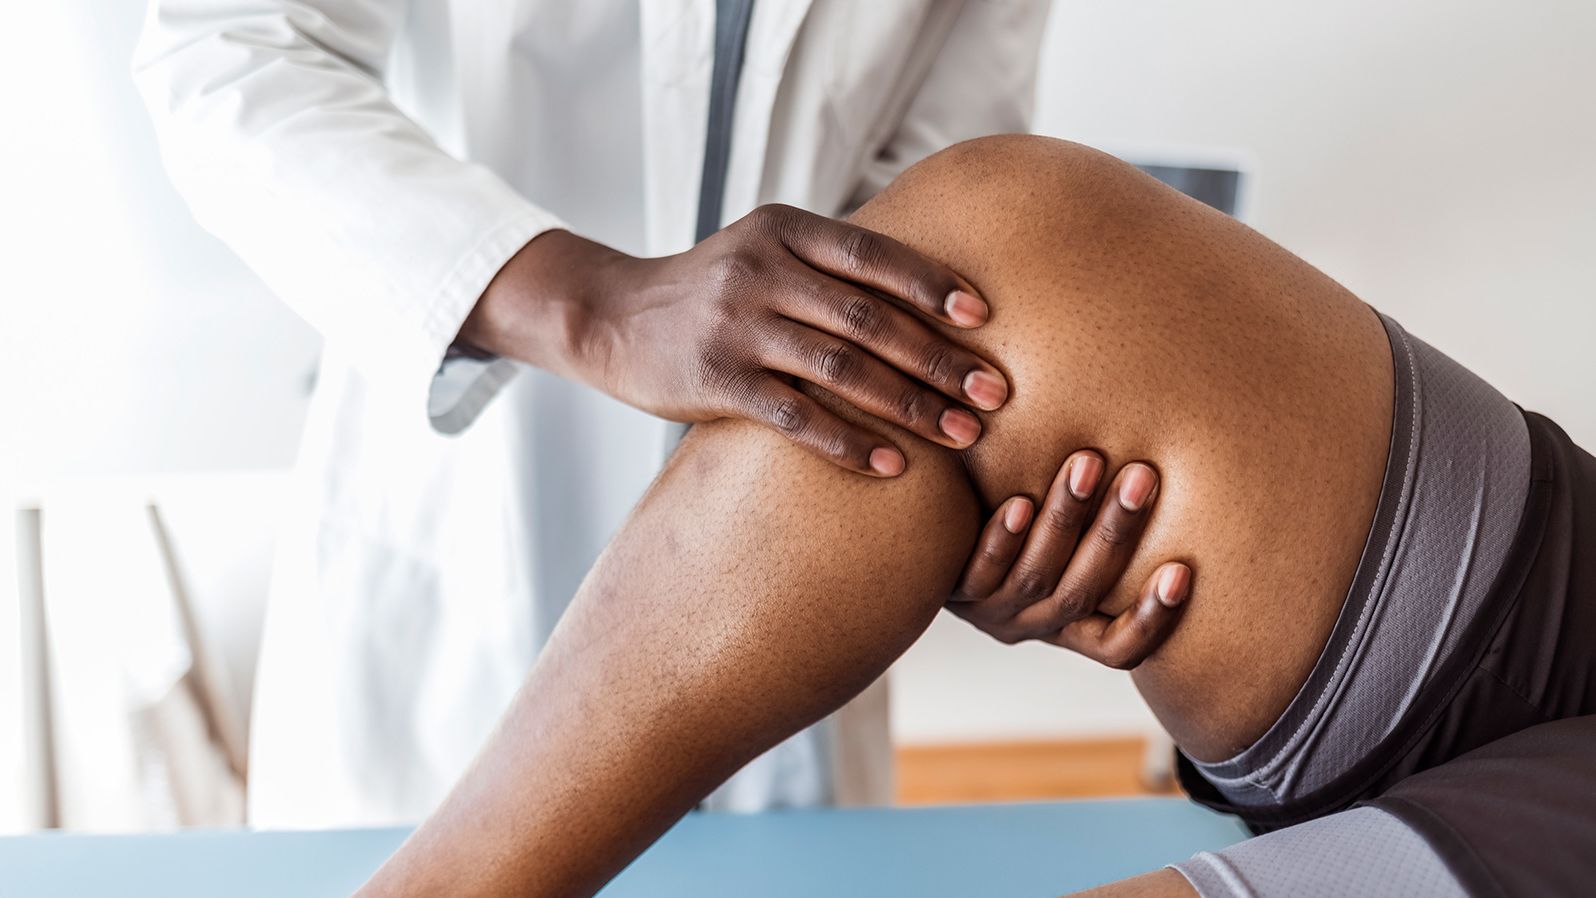 The corticosteroids used to treat osteoarthritis pain may worsen the condition over time, two new studies have suggested.